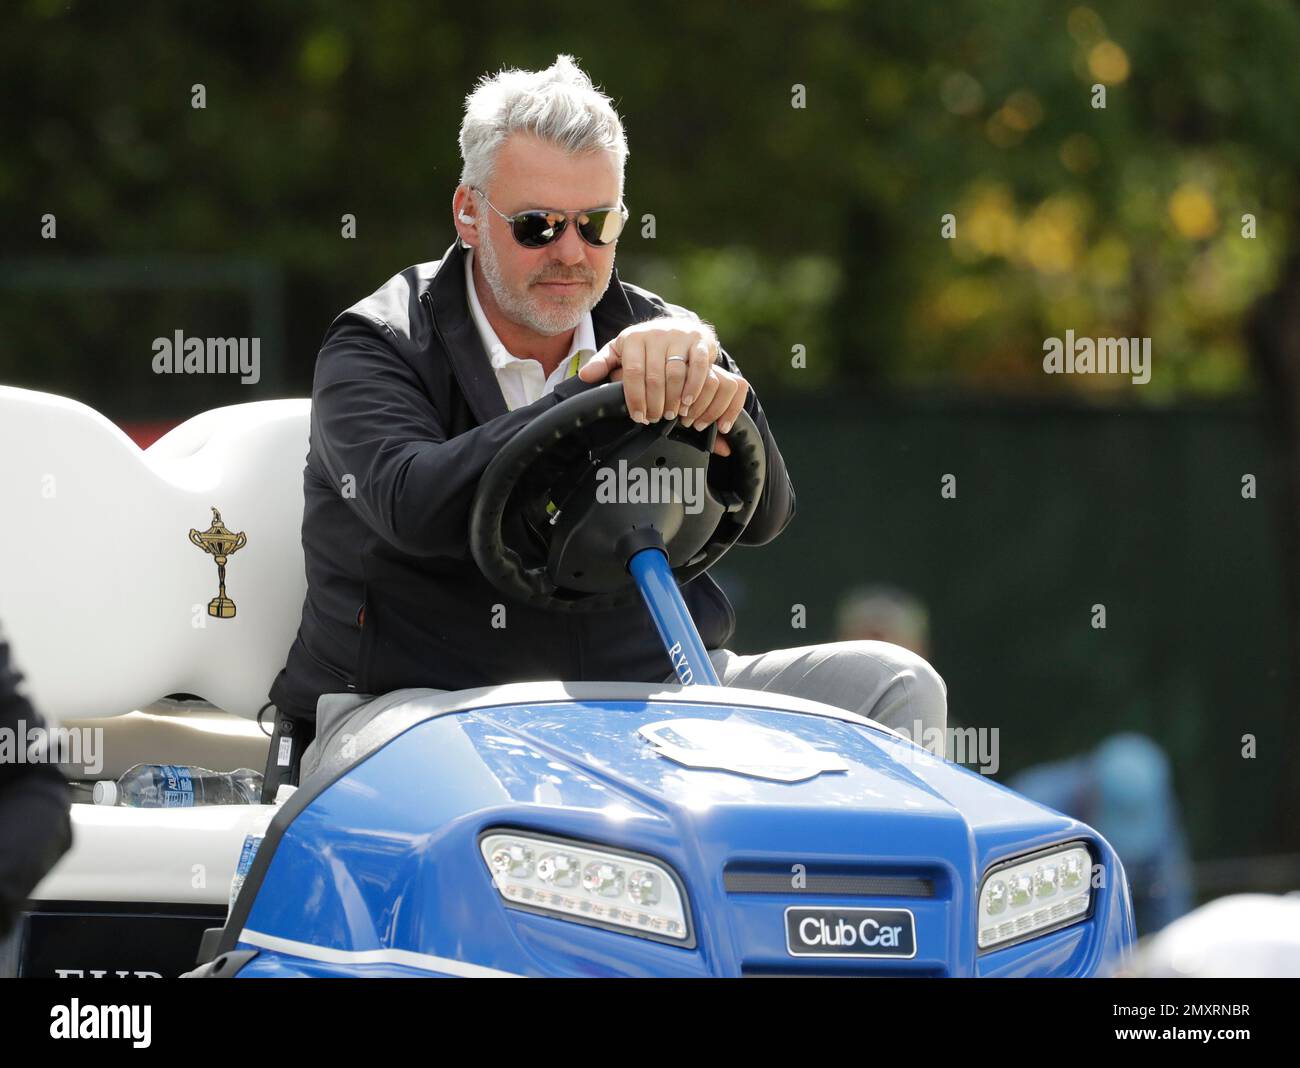 Europe captain Darren Clarke watches from a golf cart during a practice  round for the Ryder Cup golf tournament Thursday, Sept. 29, 2016, at  Hazeltine National Golf Club in Chaska, Minn. (AP